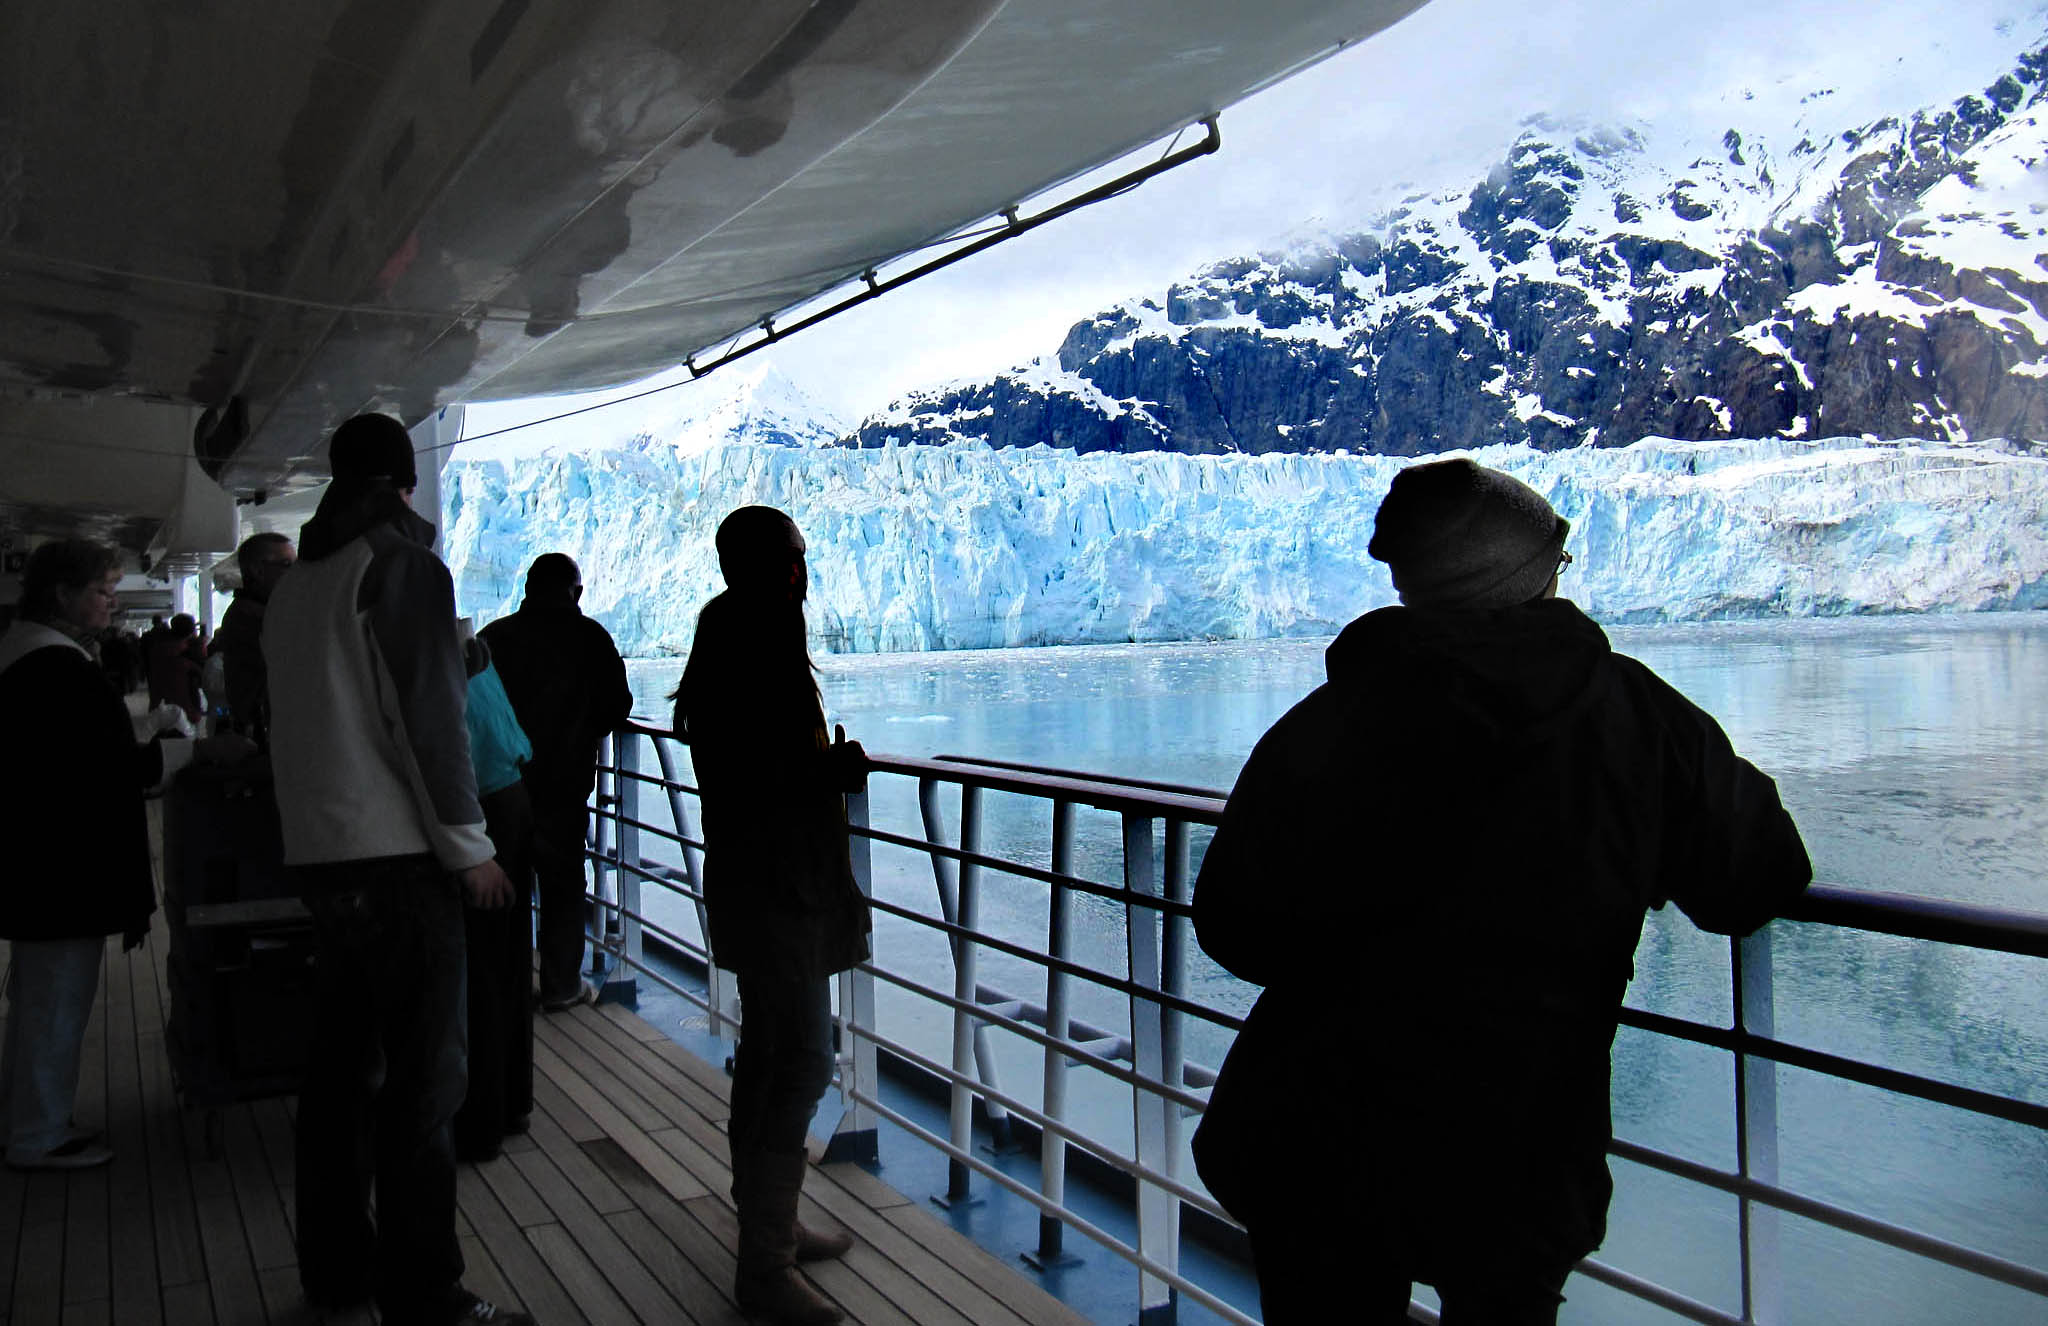 View of Glacier from boat